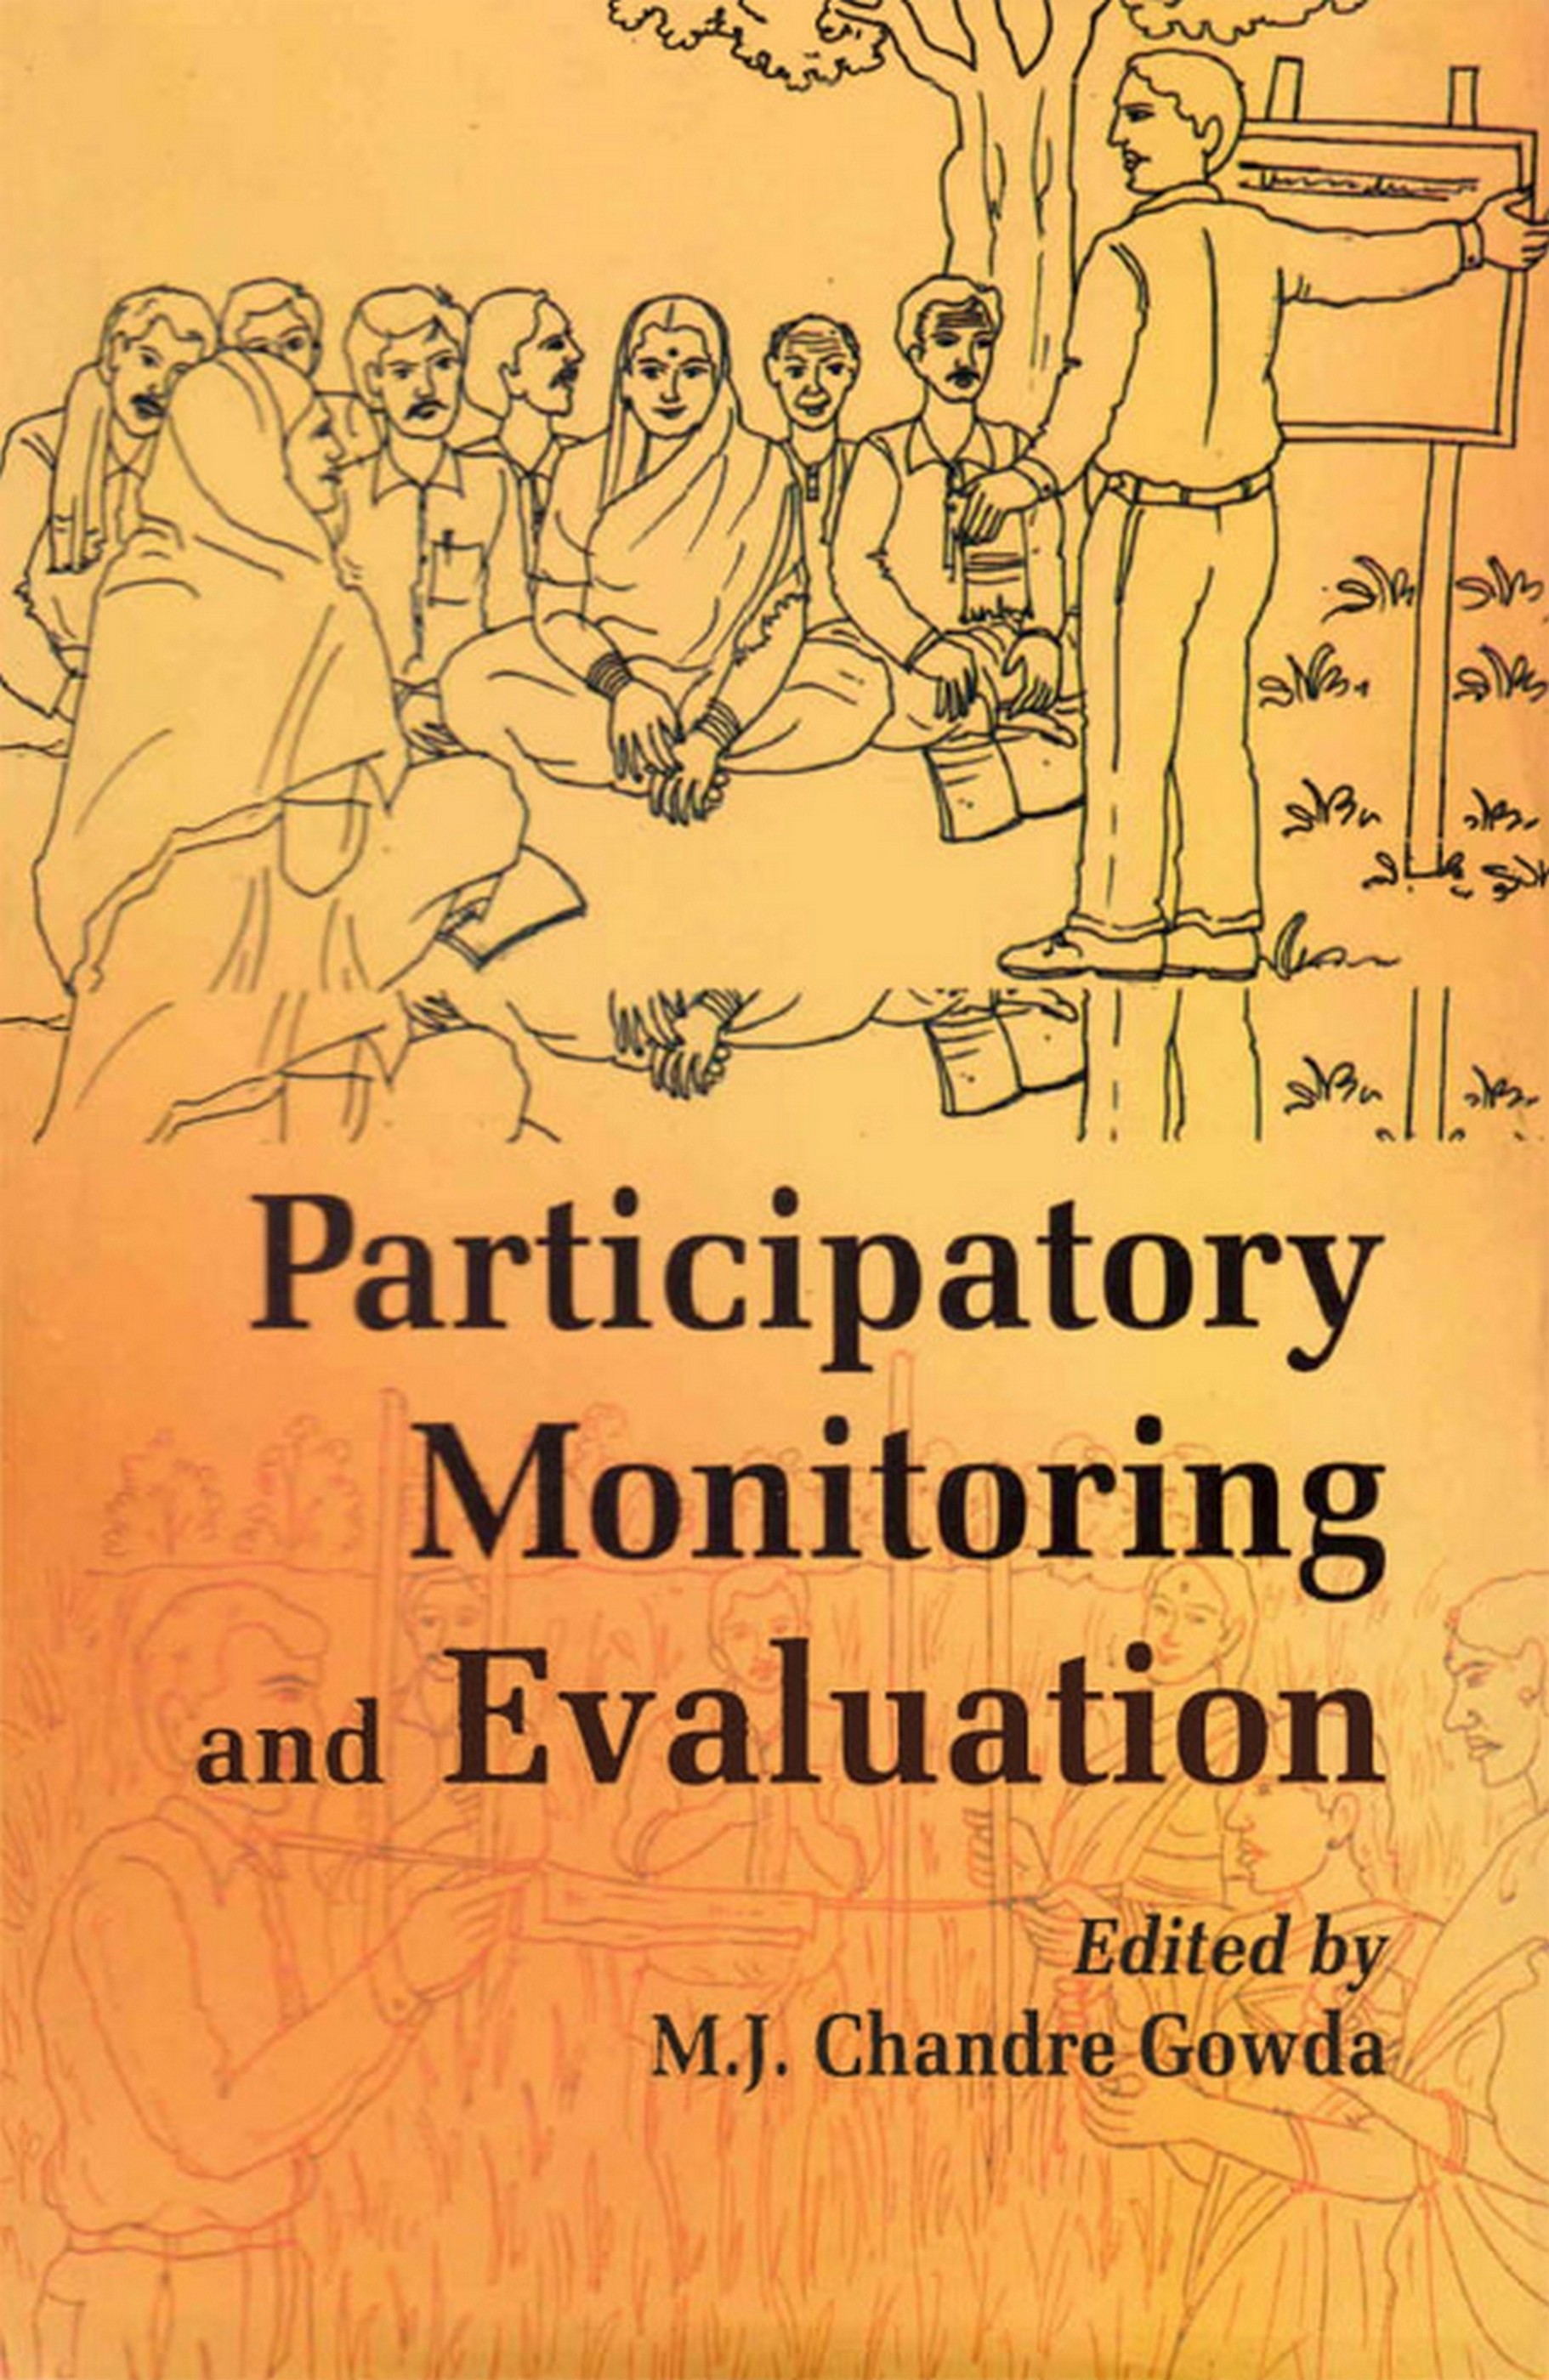 Participatory Monitoring and Evaluation